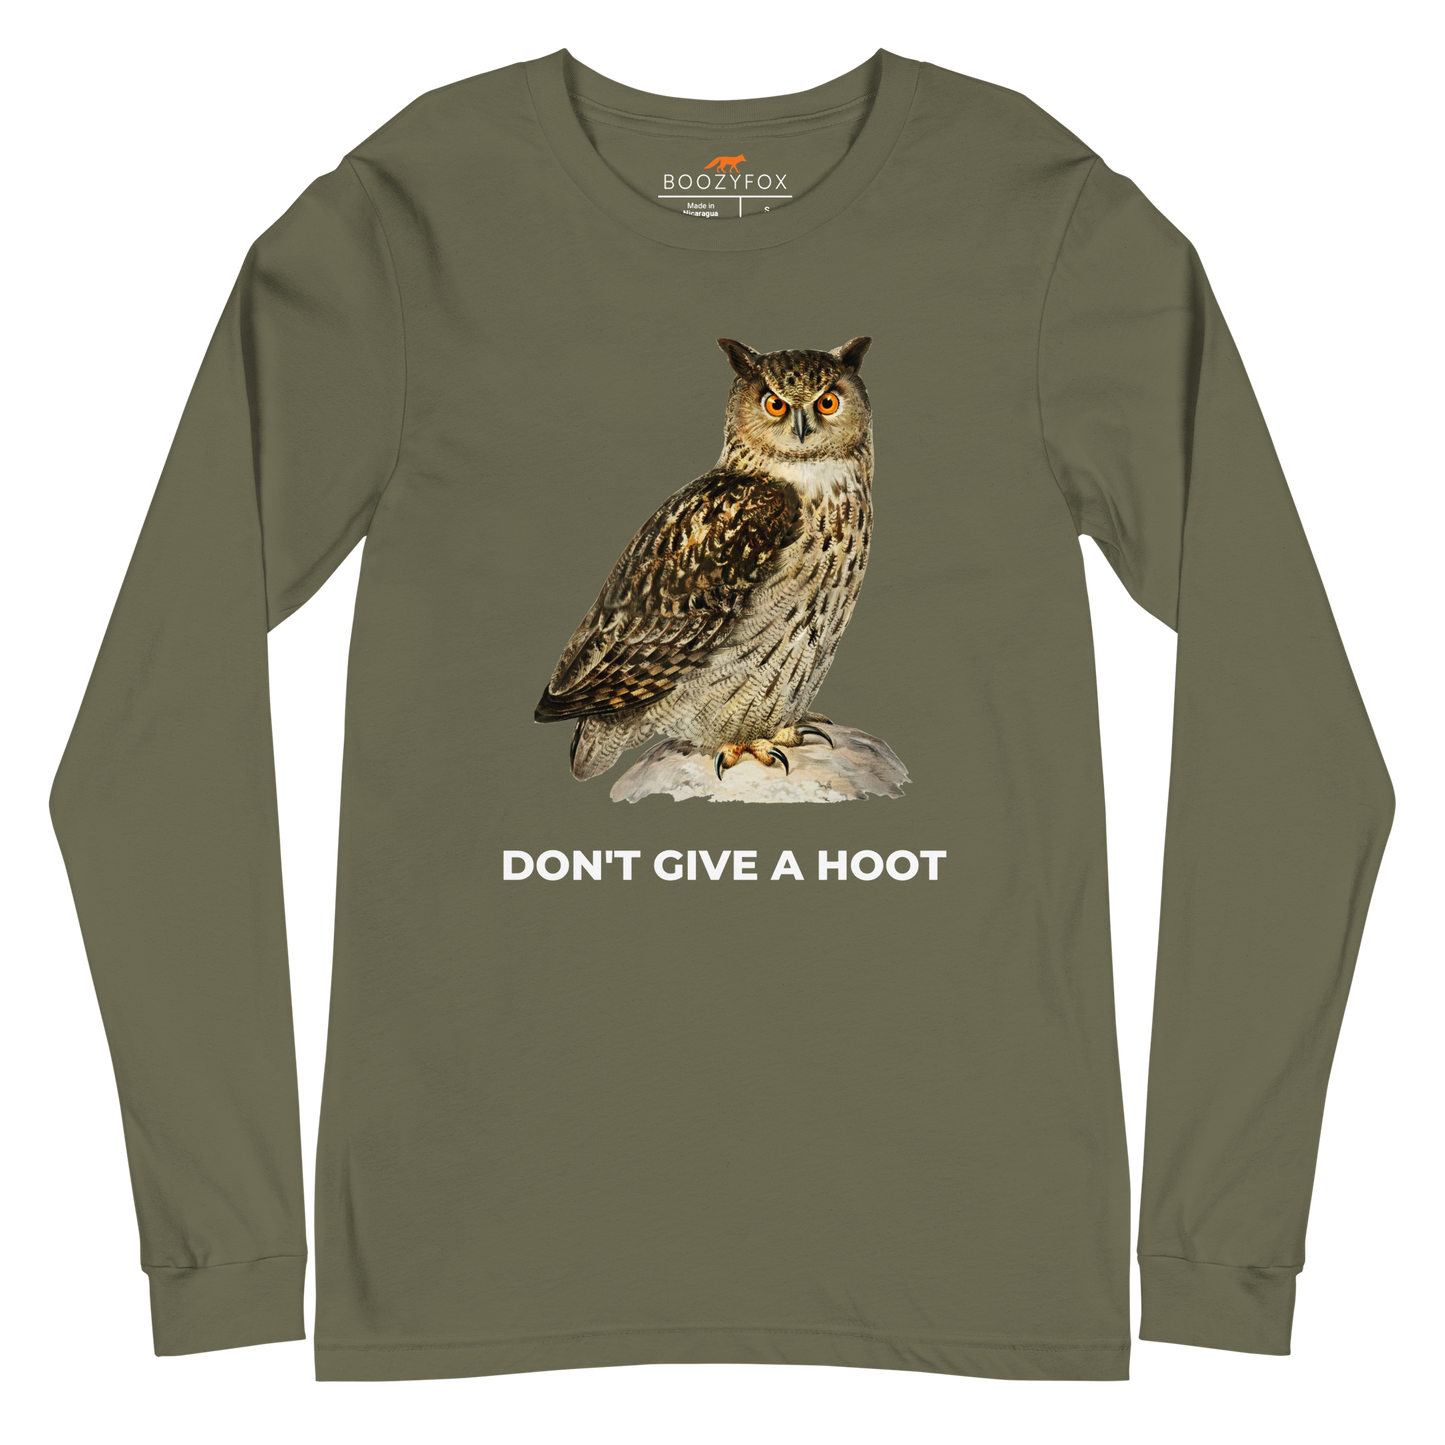 Military Green Owl Long Sleeve Tee featuring a captivating Don't Give A Hoot graphic on the chest - Funny Owl Long Sleeve Graphic Tees - Boozy Fox